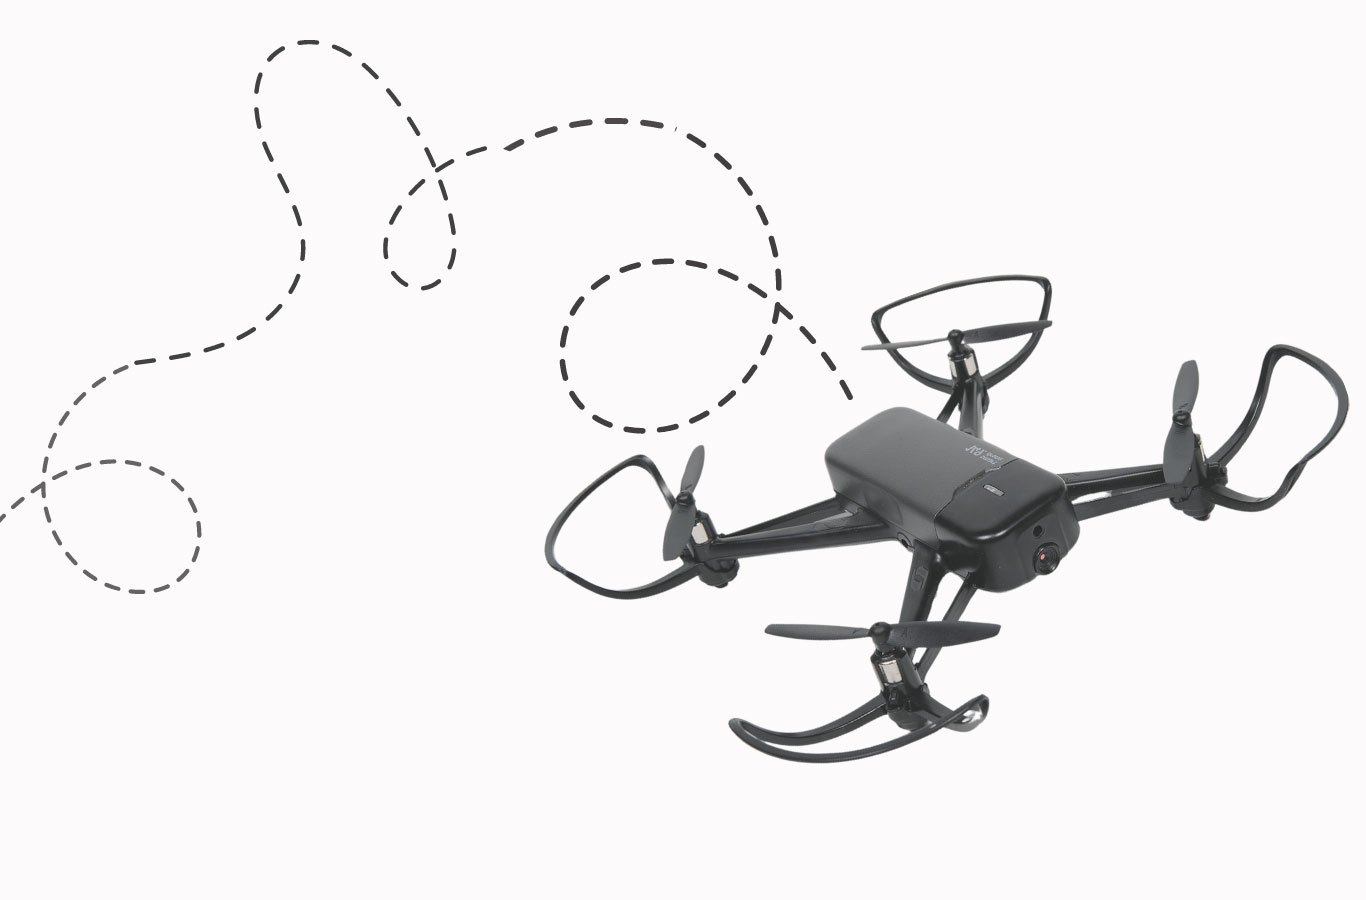 Echo drone flying with a dotted line showing the path